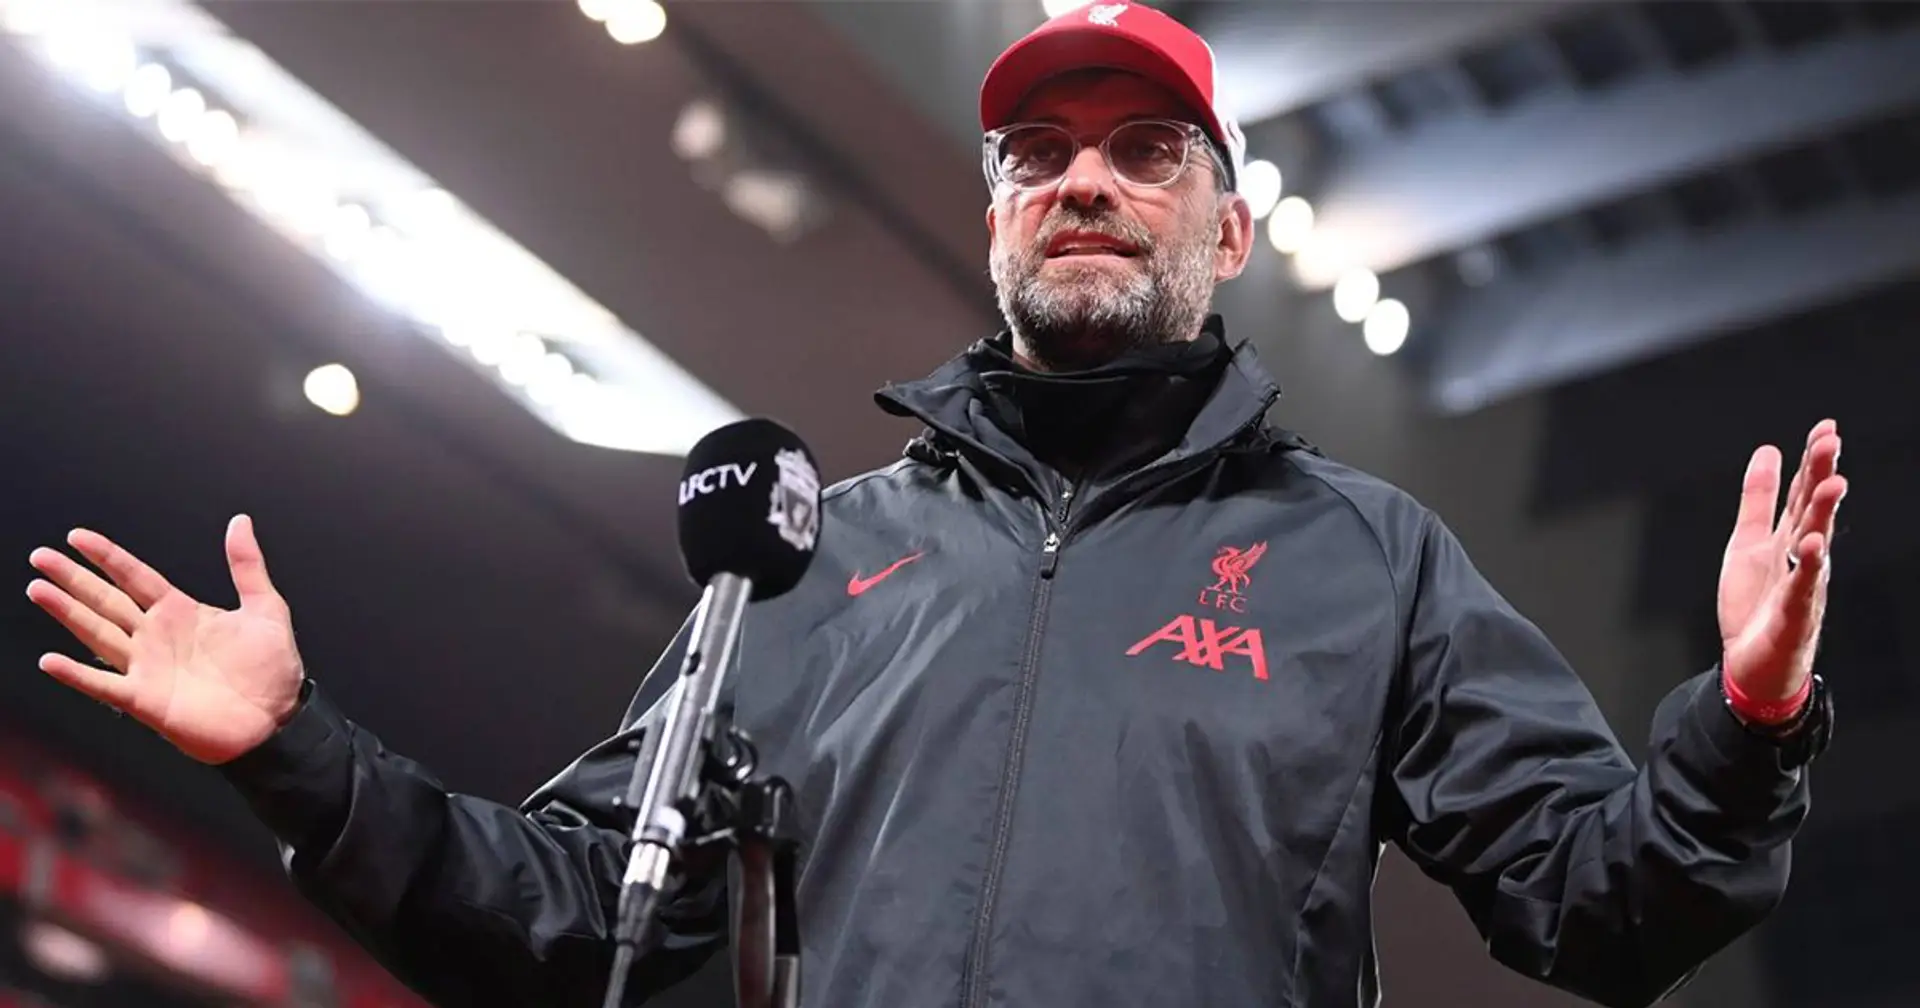 Jurgen Klopp: 'This game tonight matters like you wouldn’t believe!'